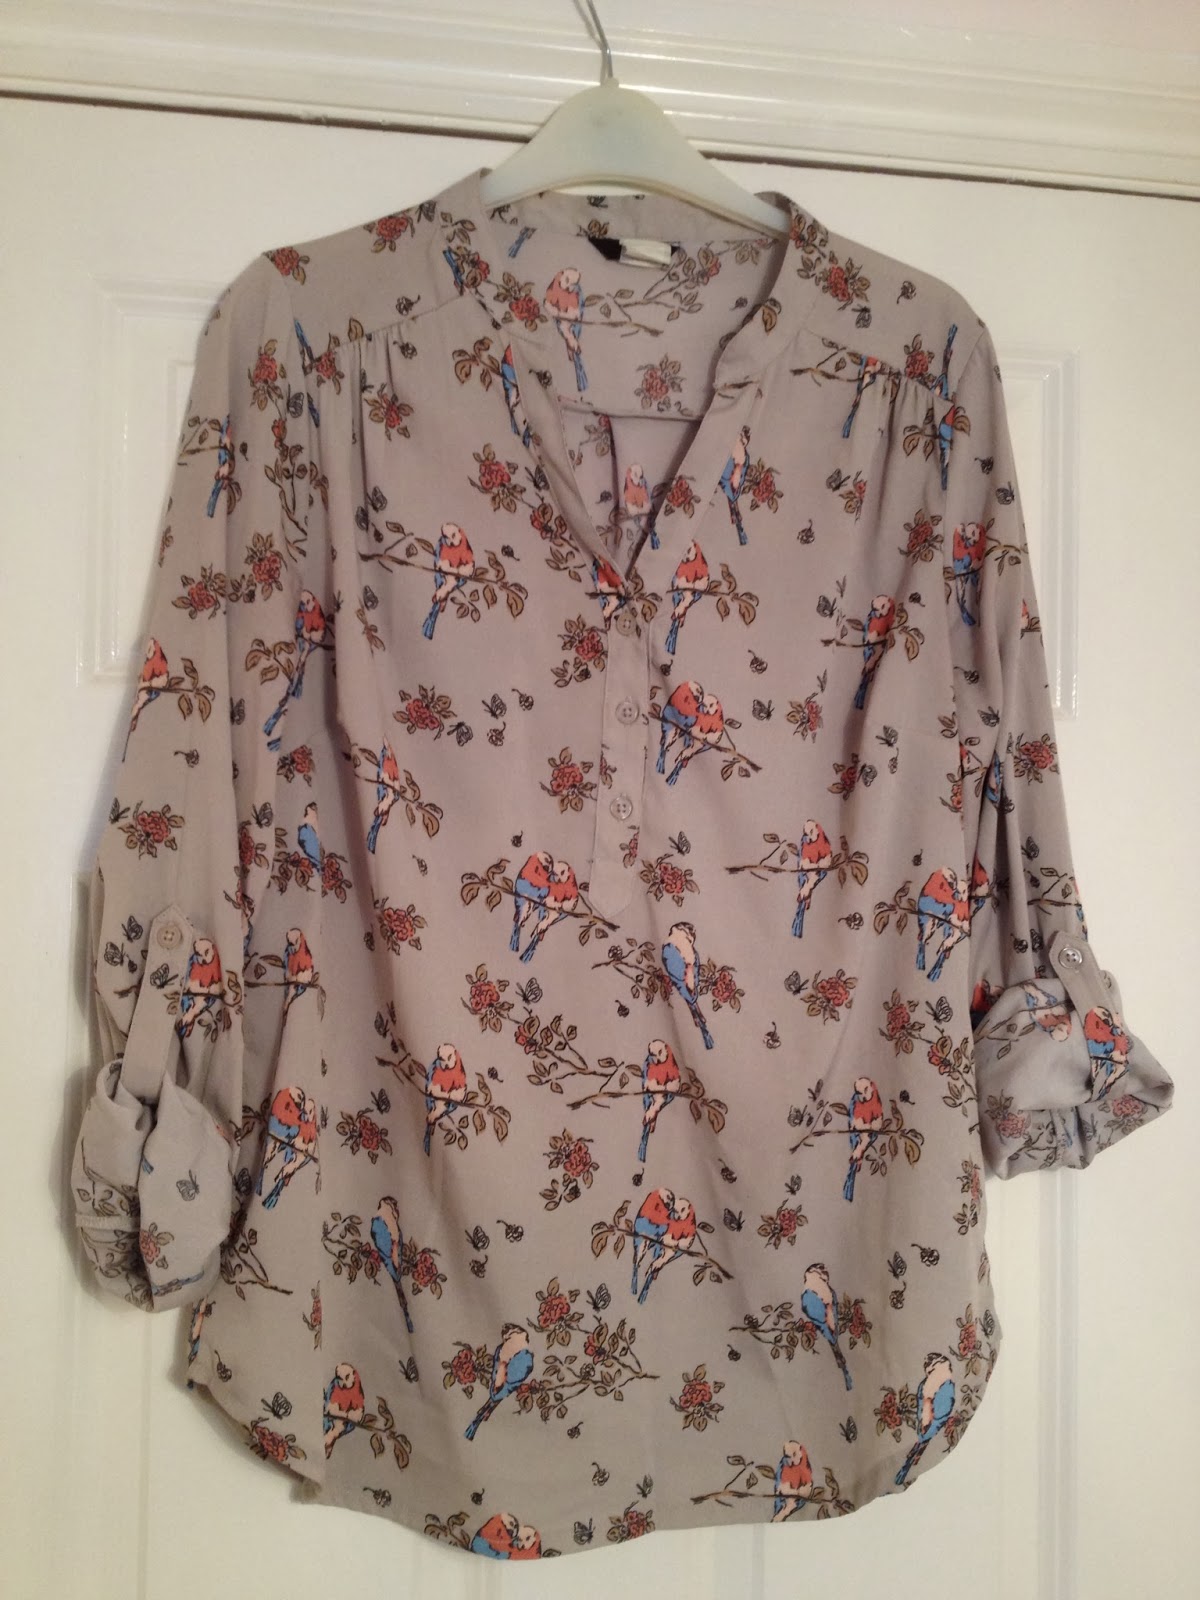 Refashion Co-op: From Flappy into Fitted... a blouse remade!